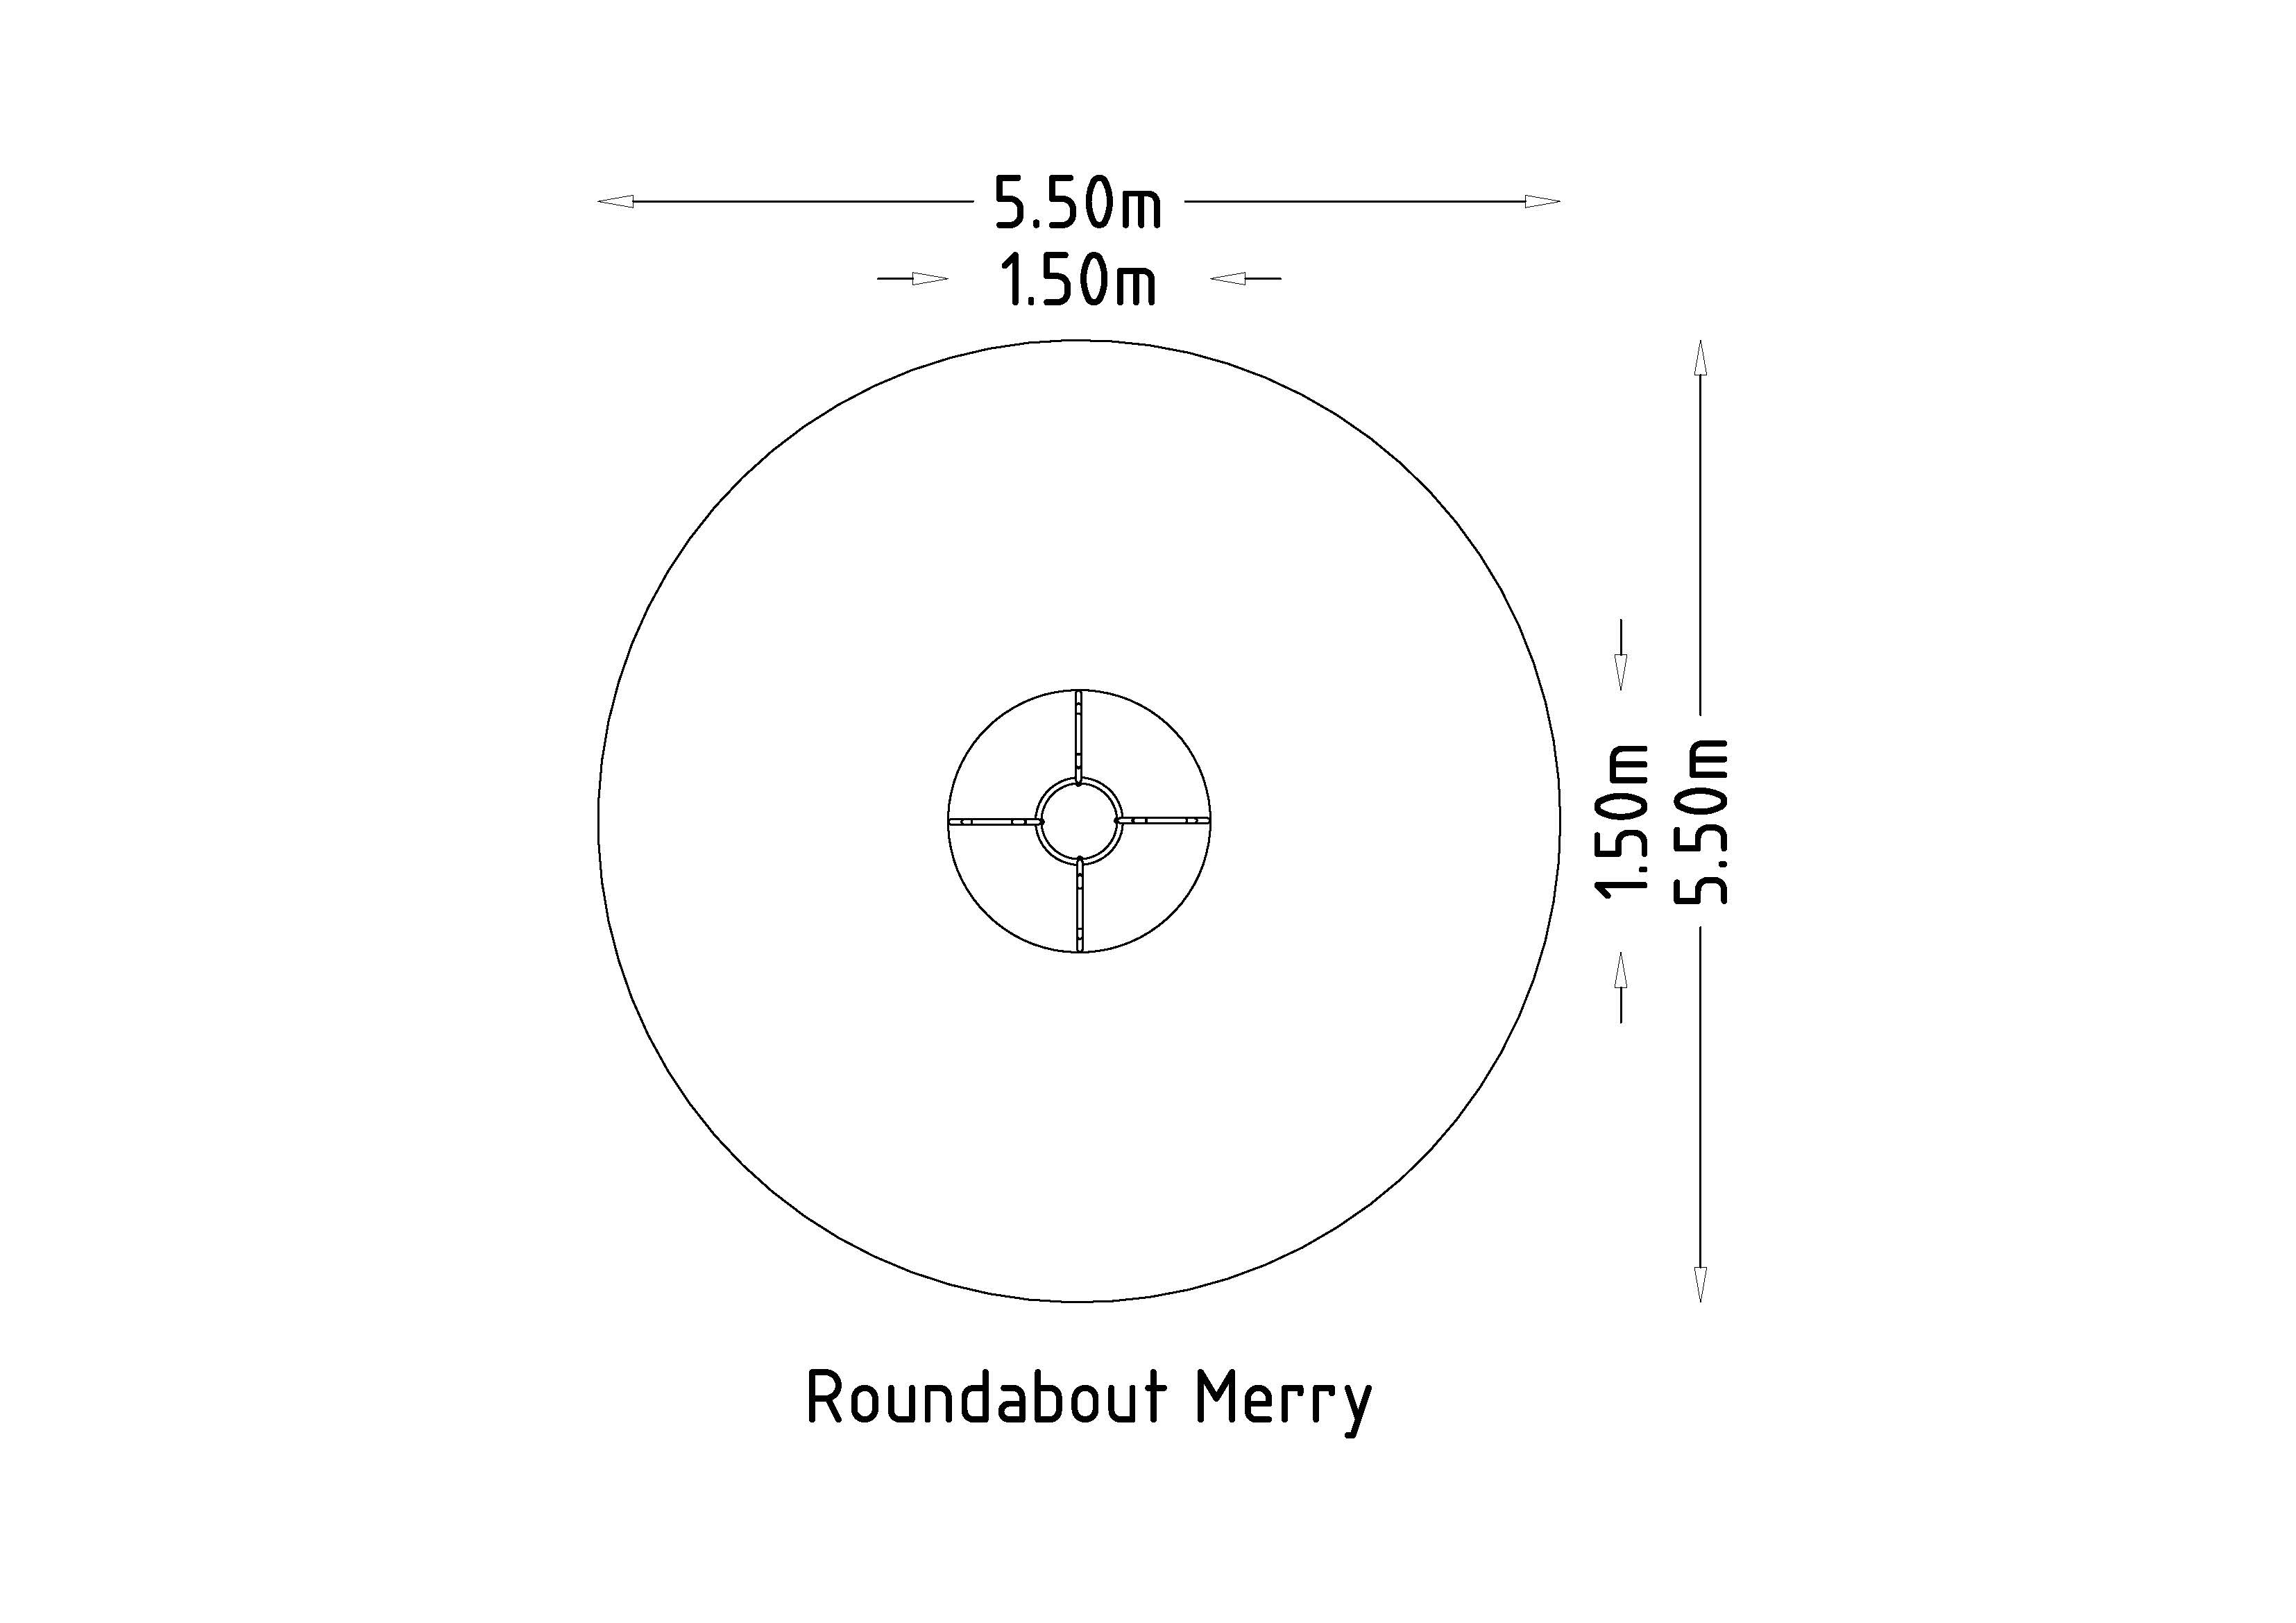 Roundabout Merry